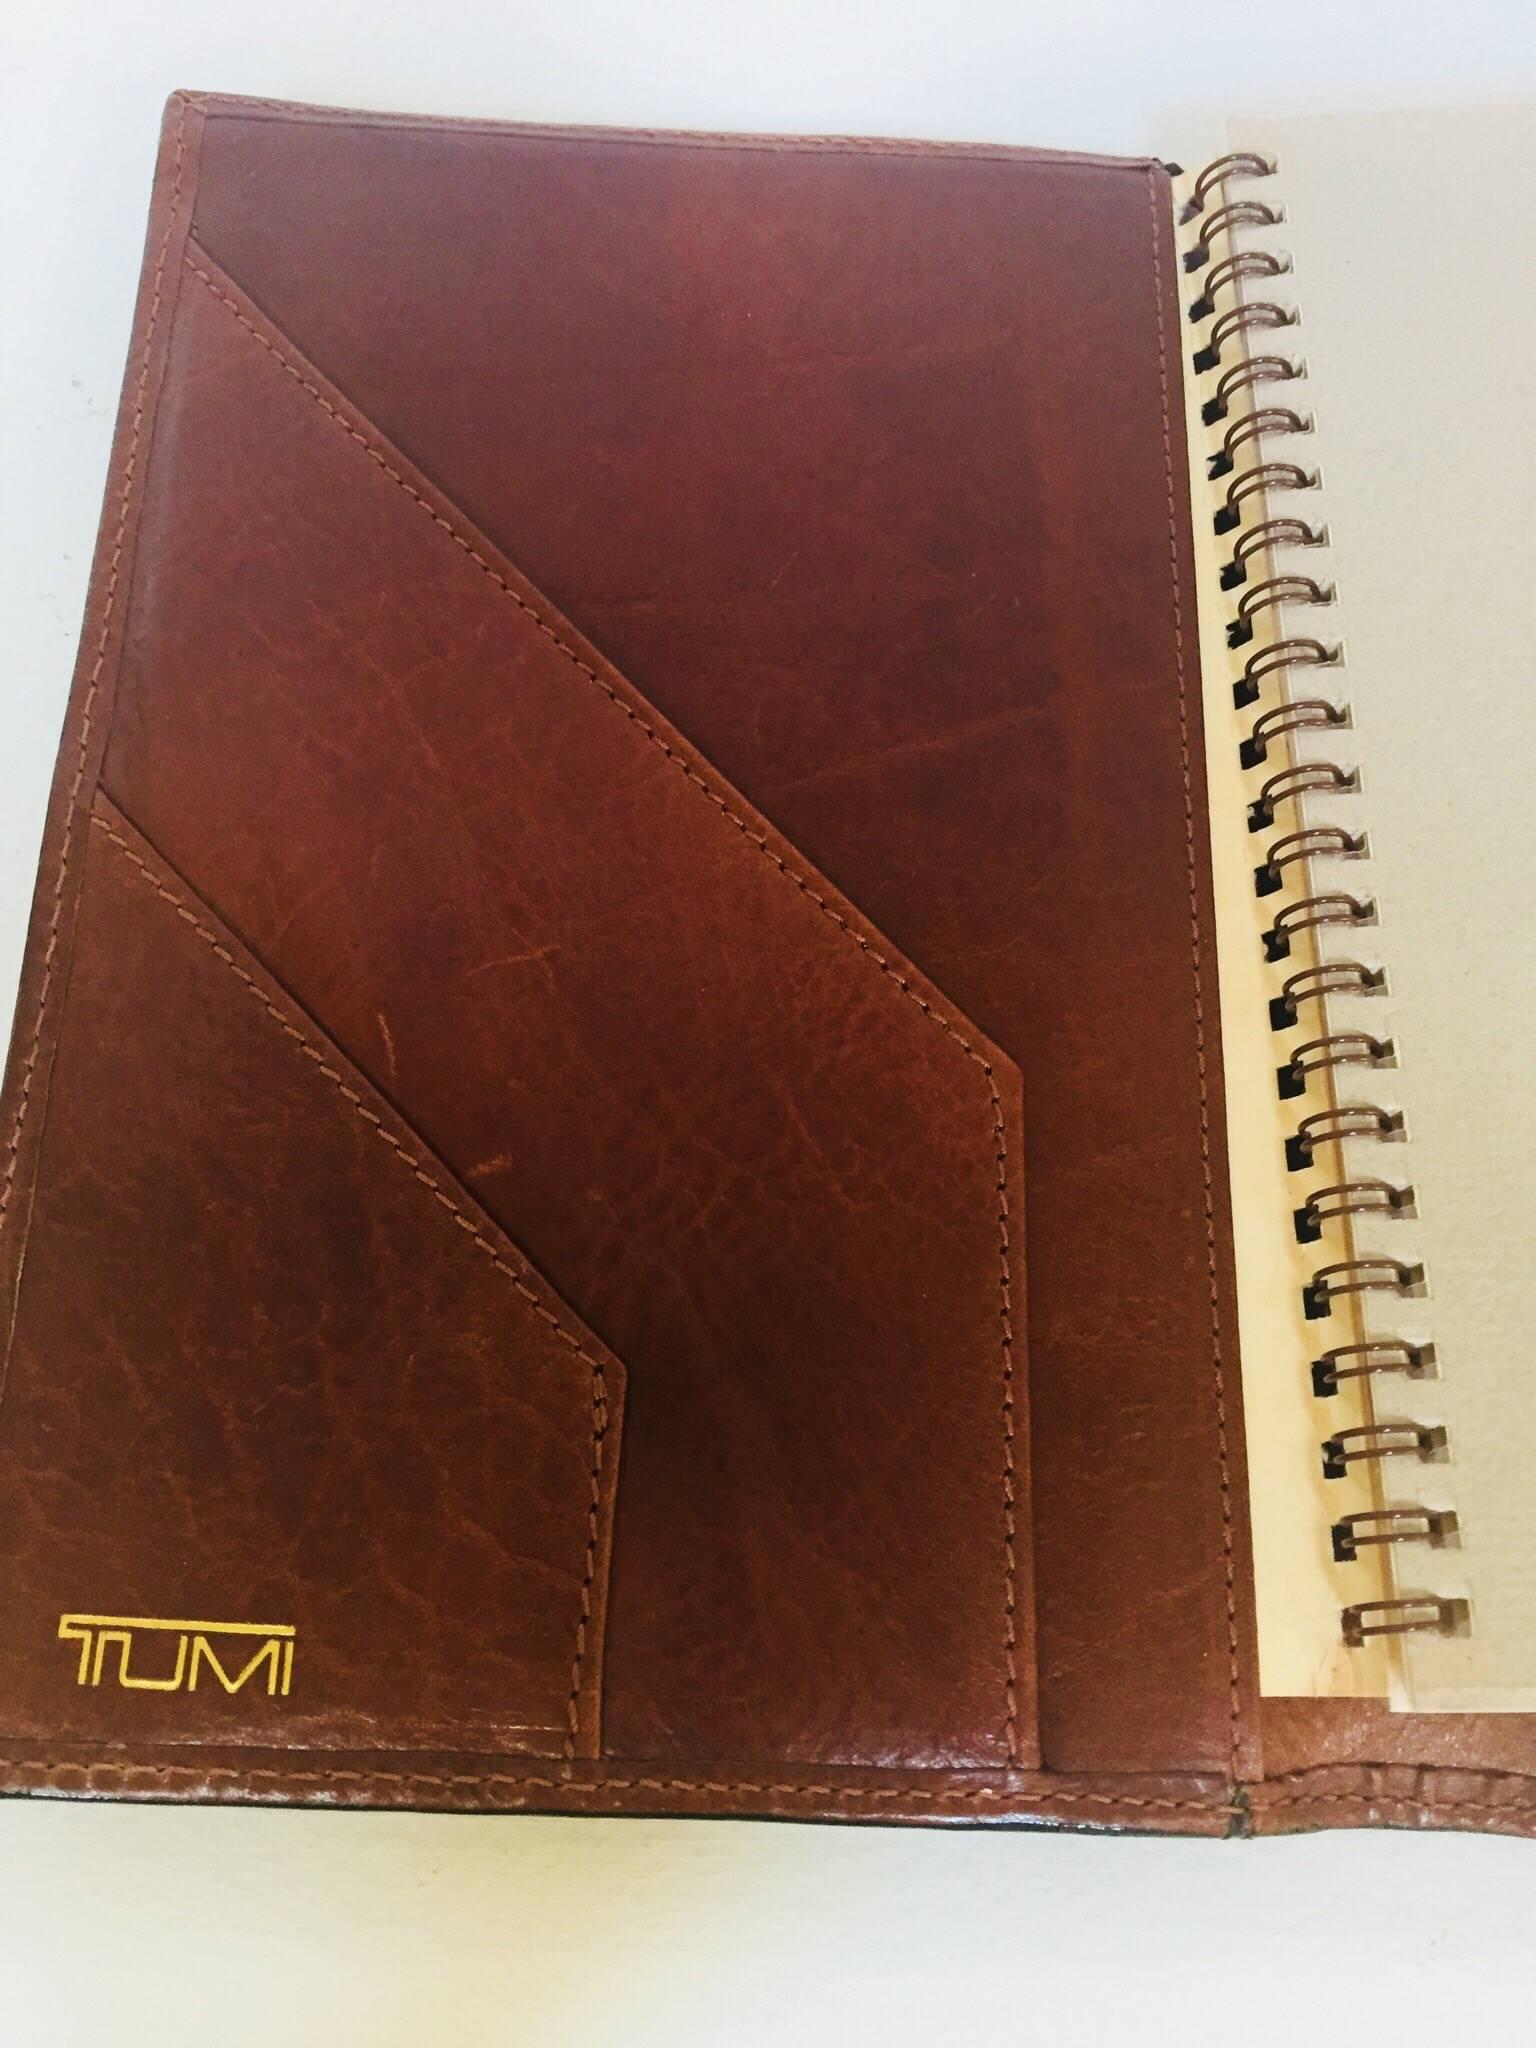 Vintage Leather Stitched Agenda Refillable by Tumi For Sale 1